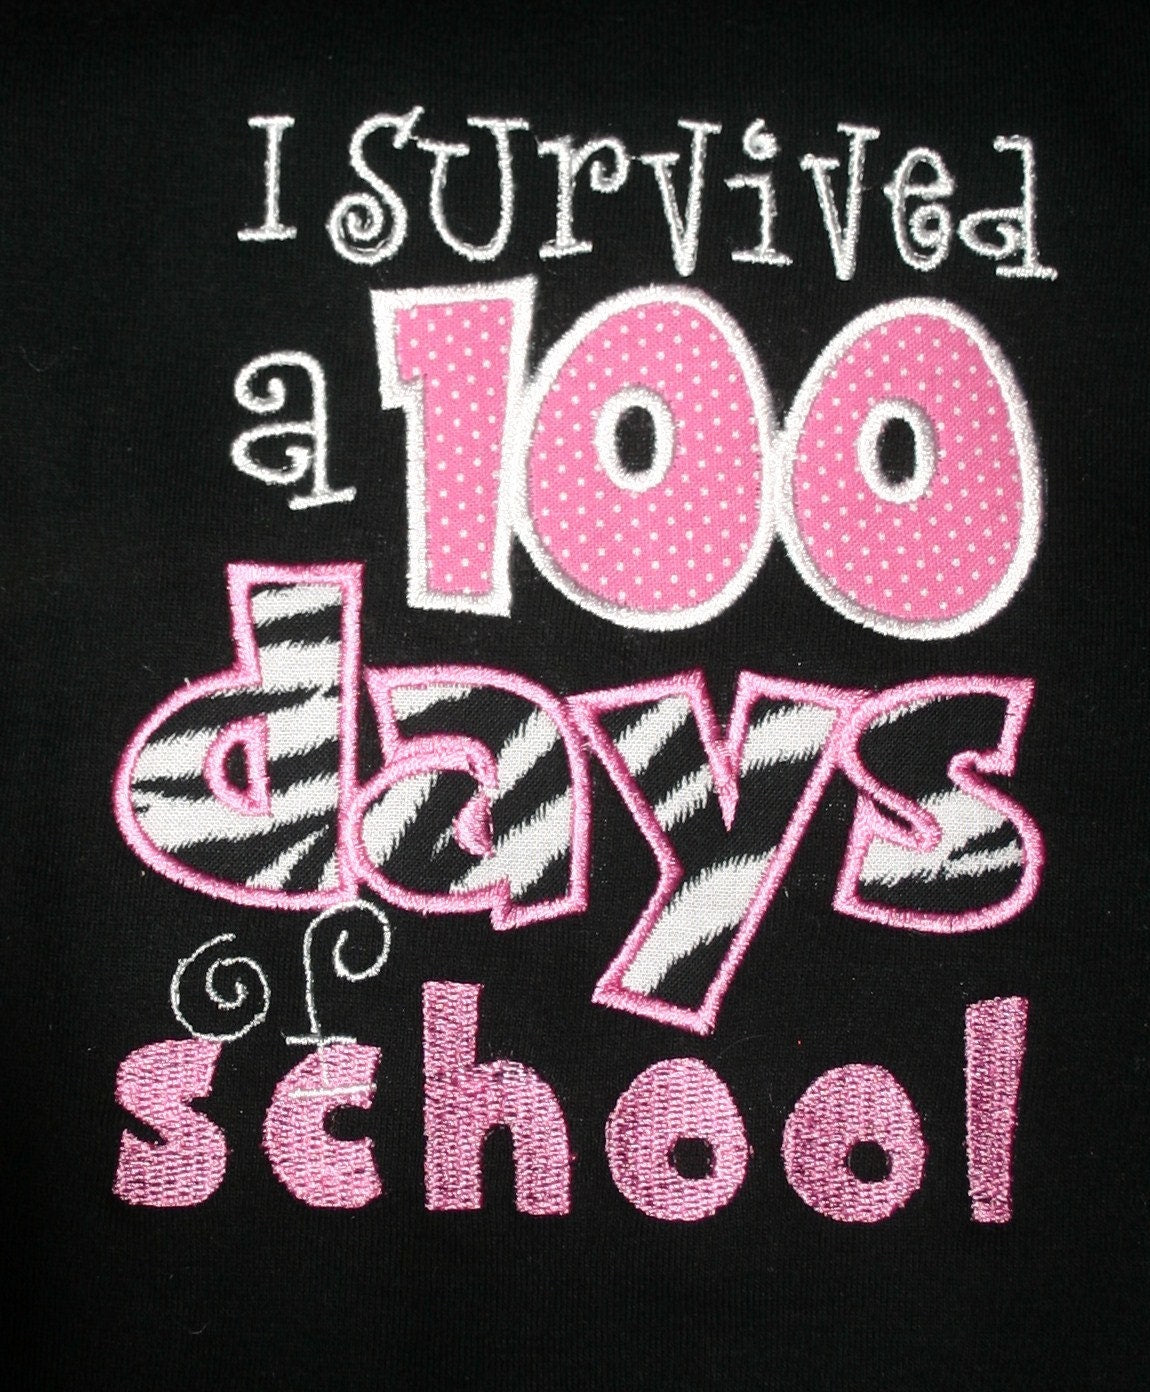 100th Day of School Appliqued Tee, 100th Day of School Shirt, 100th Day of School Tshirt